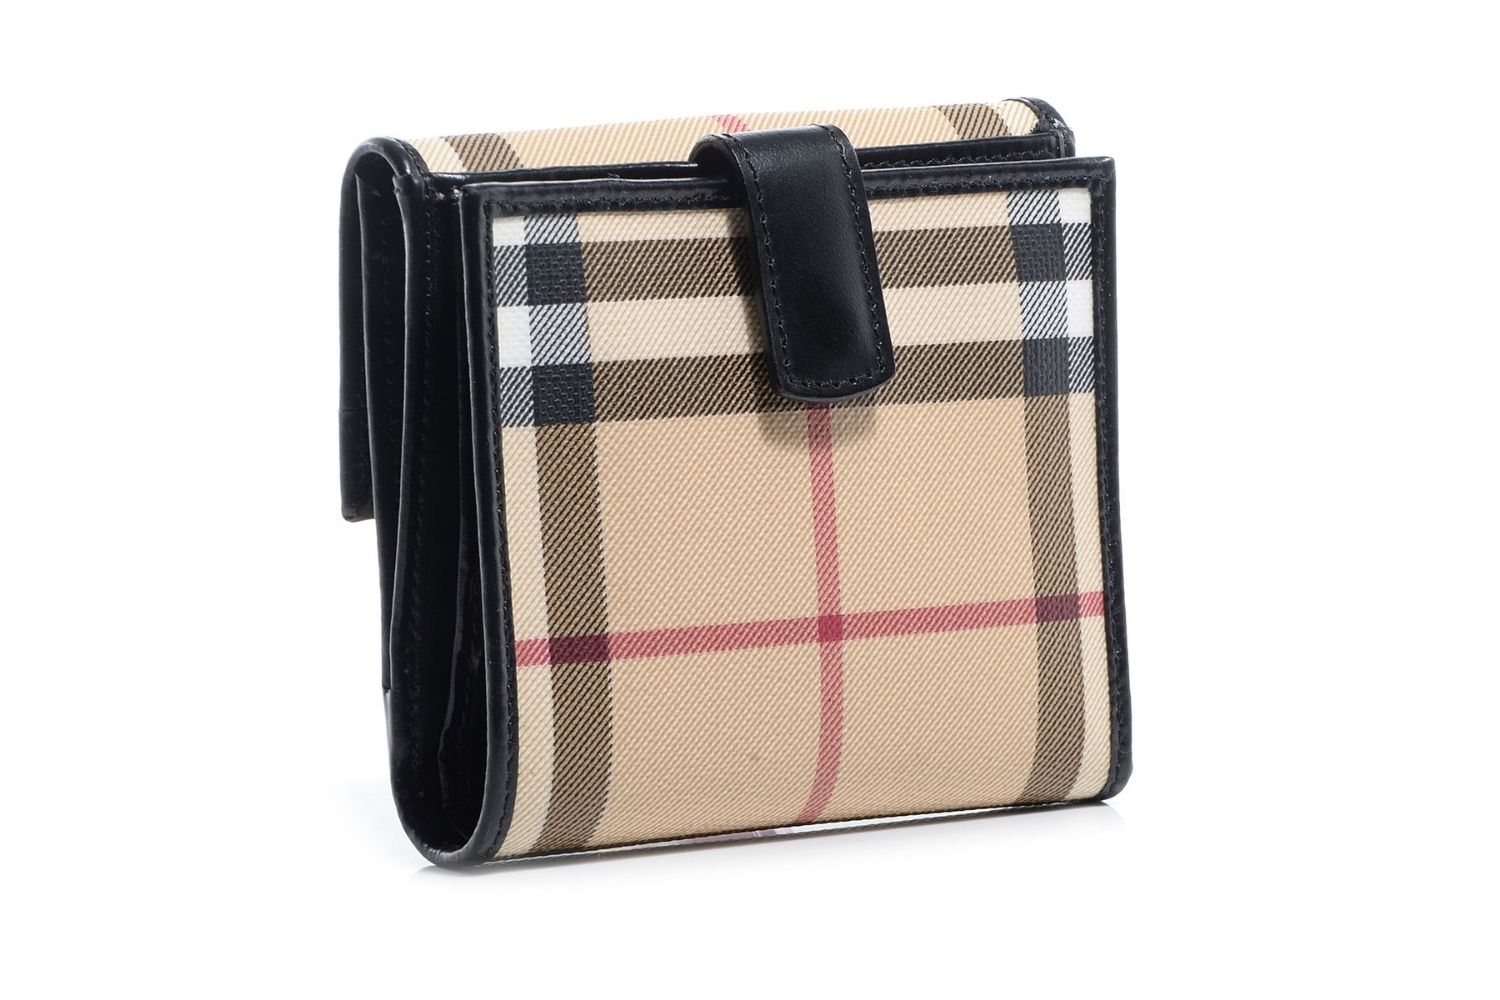 19-surprising-facts-about-burberry-wallet